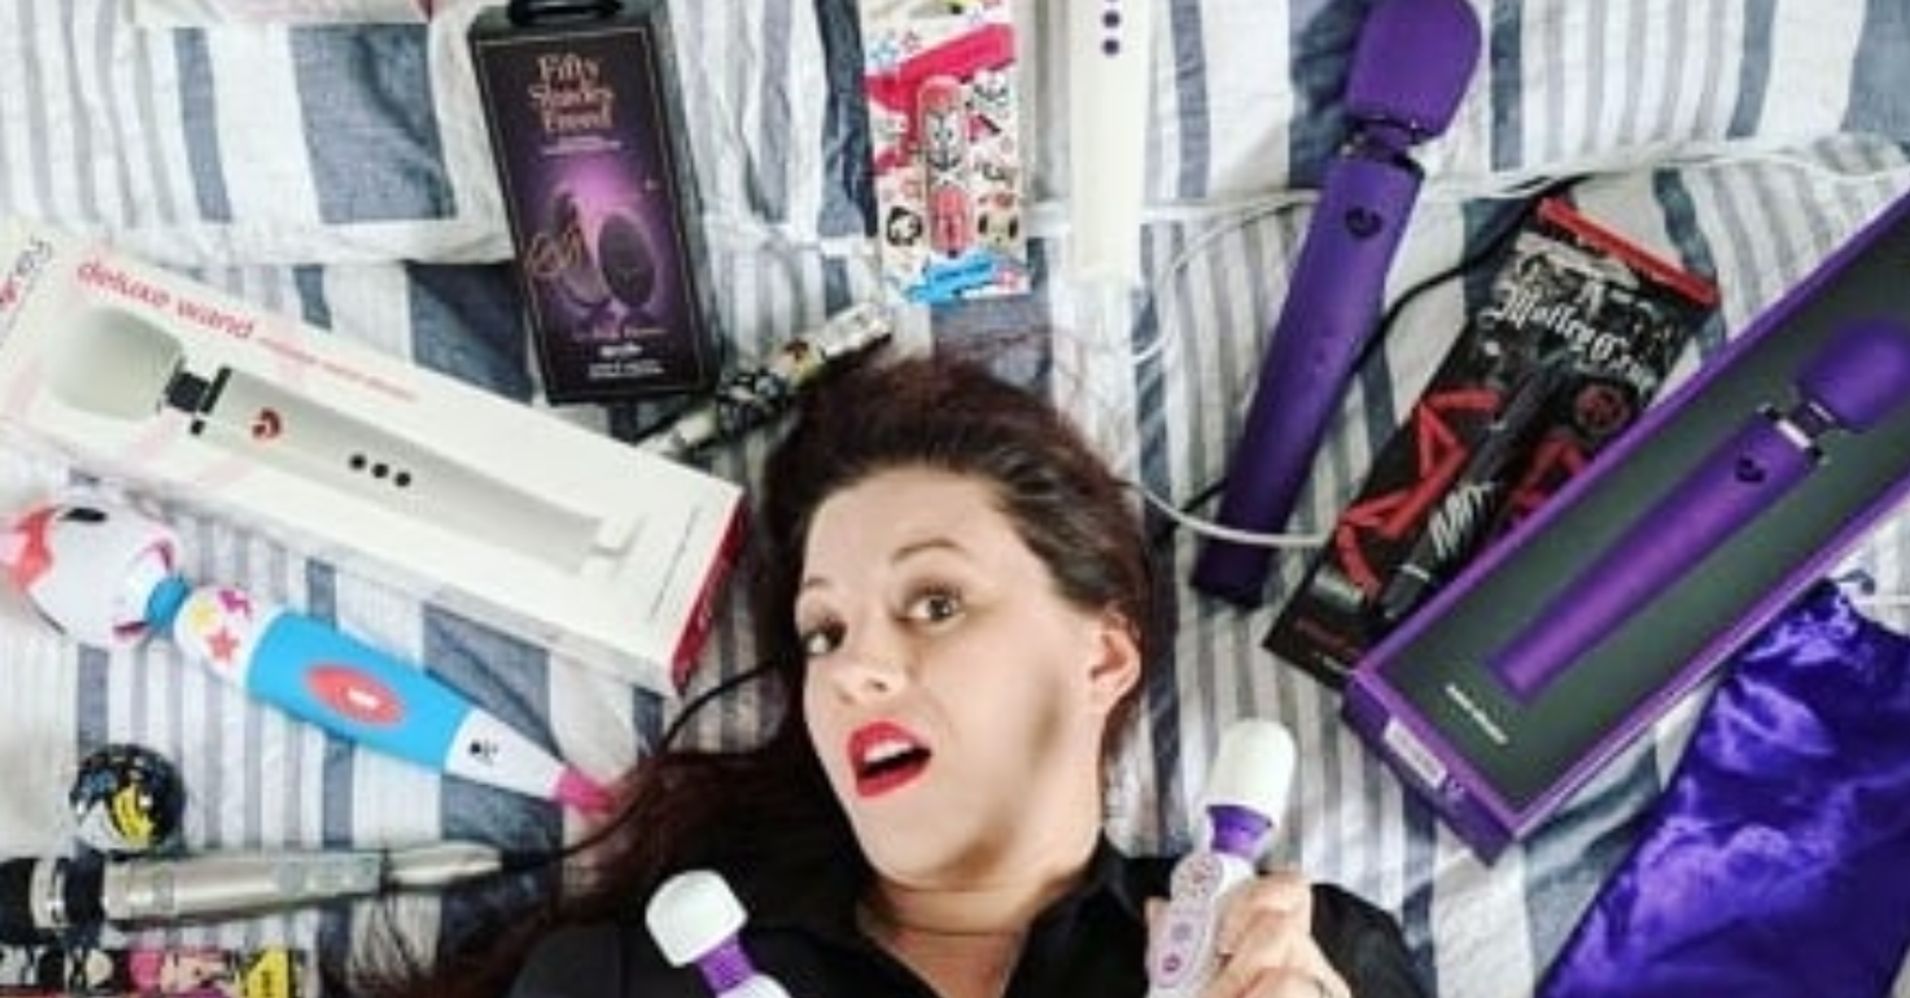 This Woman Tests And Reviews Sex Toys For A Living Heres What Shes